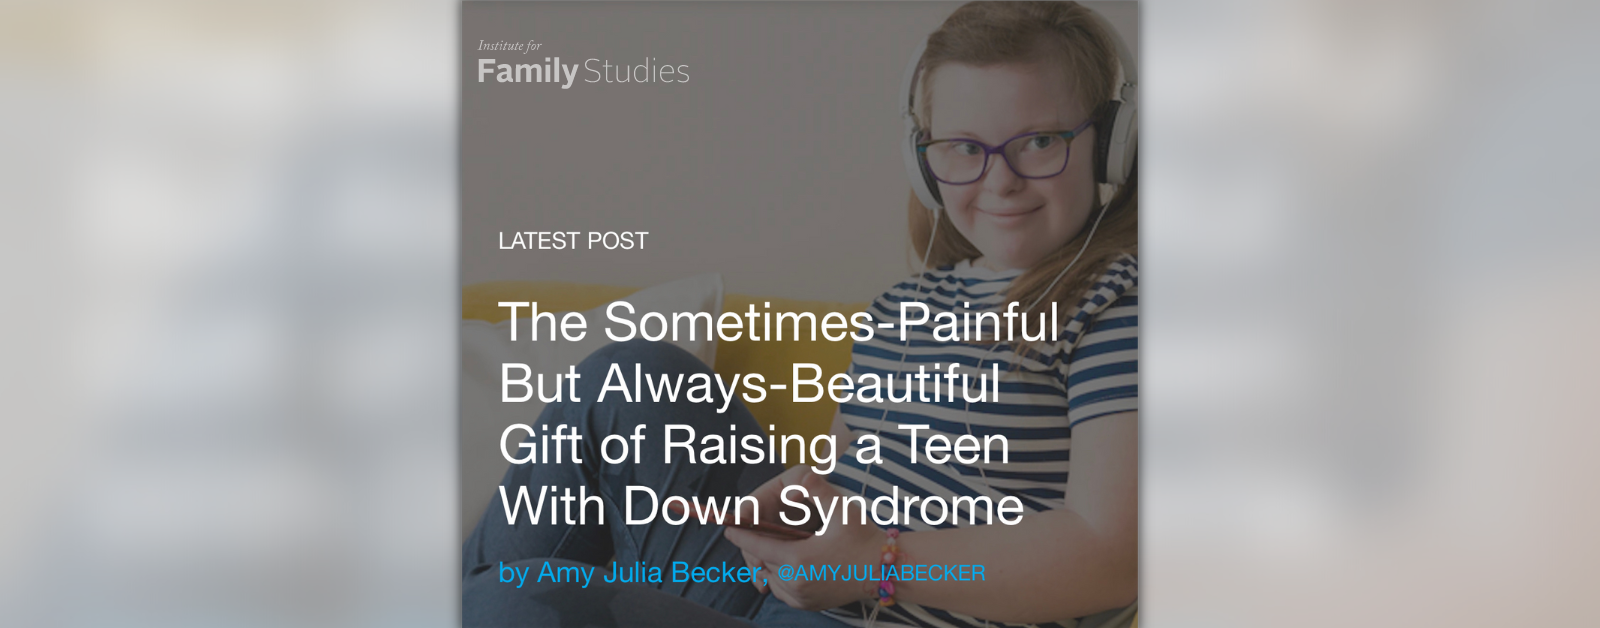 screenshot of IFS blog post with a graphic of a teen with Down syndrome wearing headphones and text from post caption